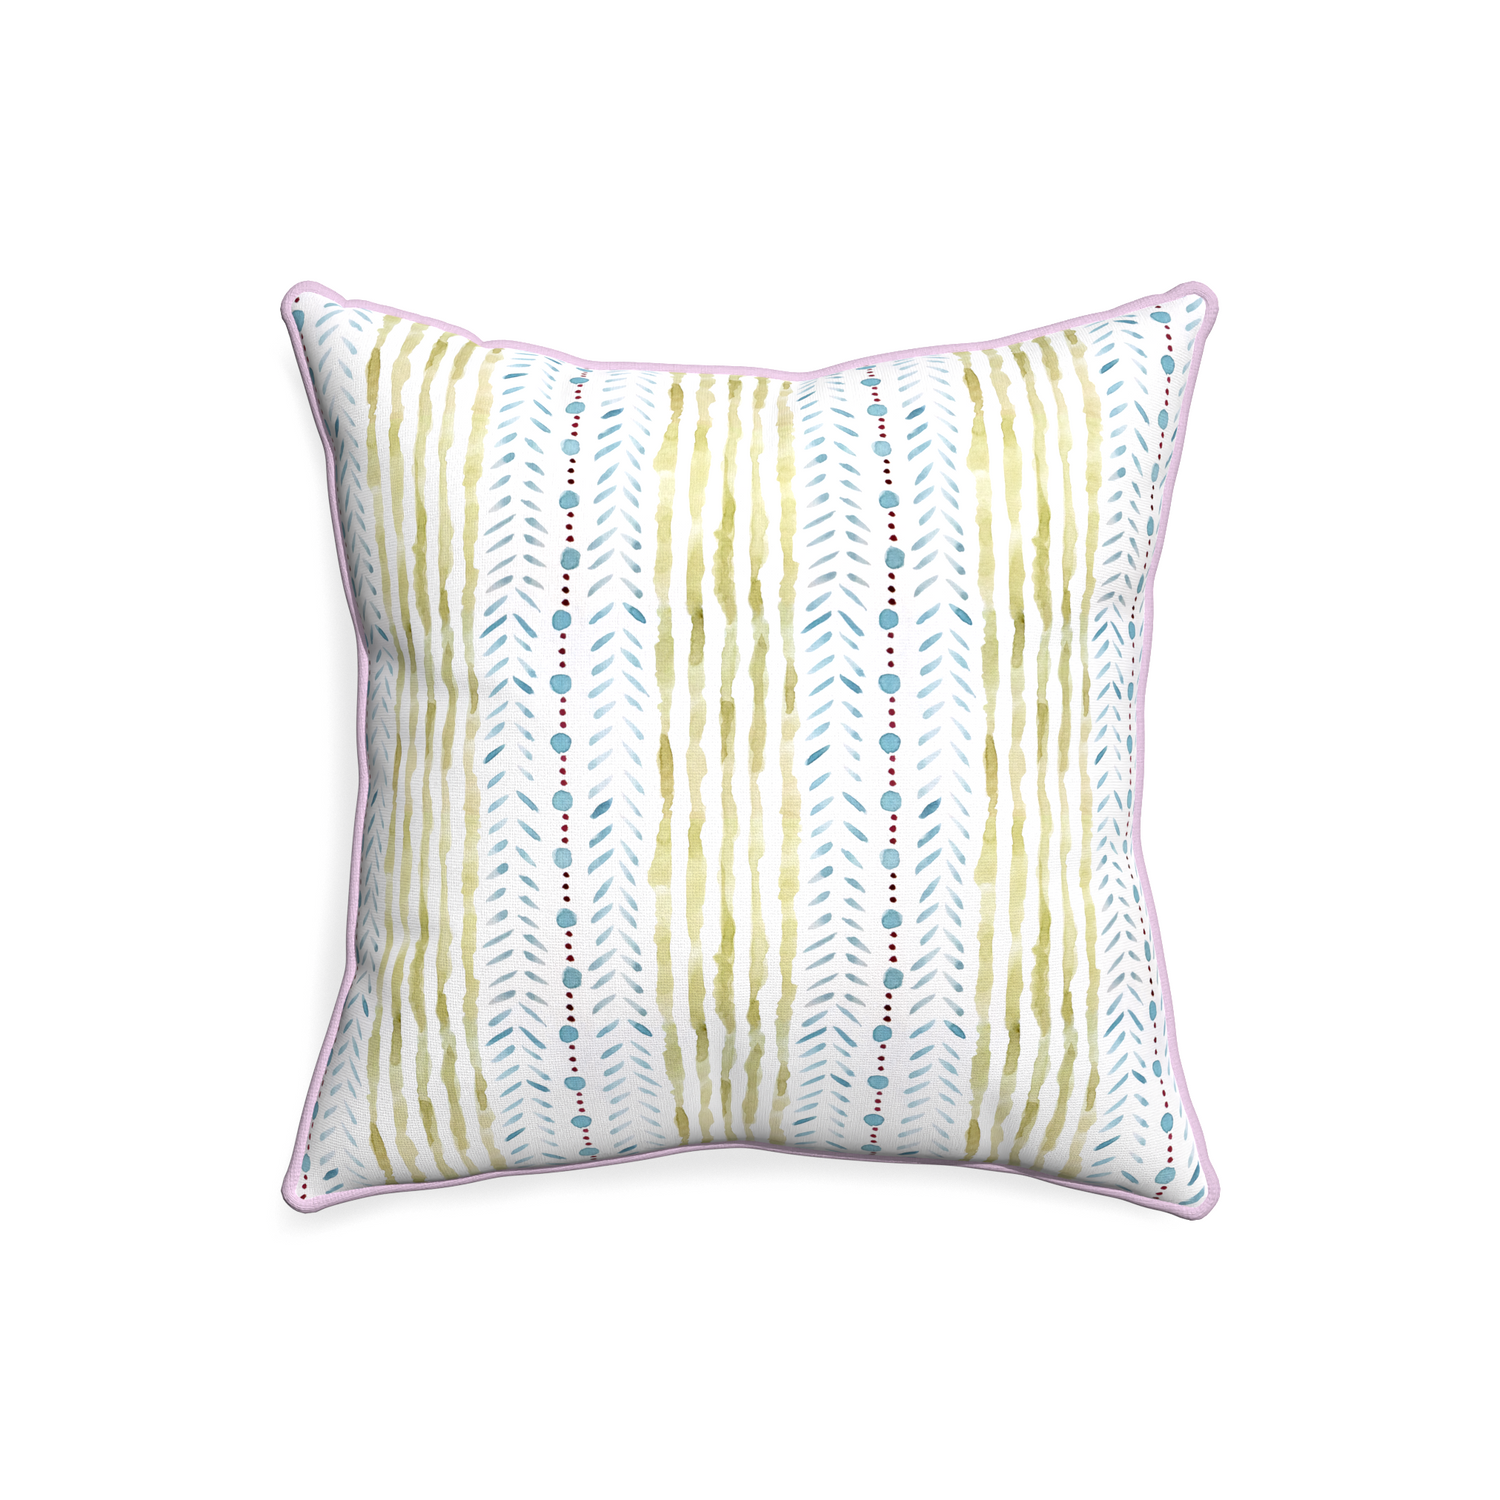 20-square julia custom pillow with l piping on white background